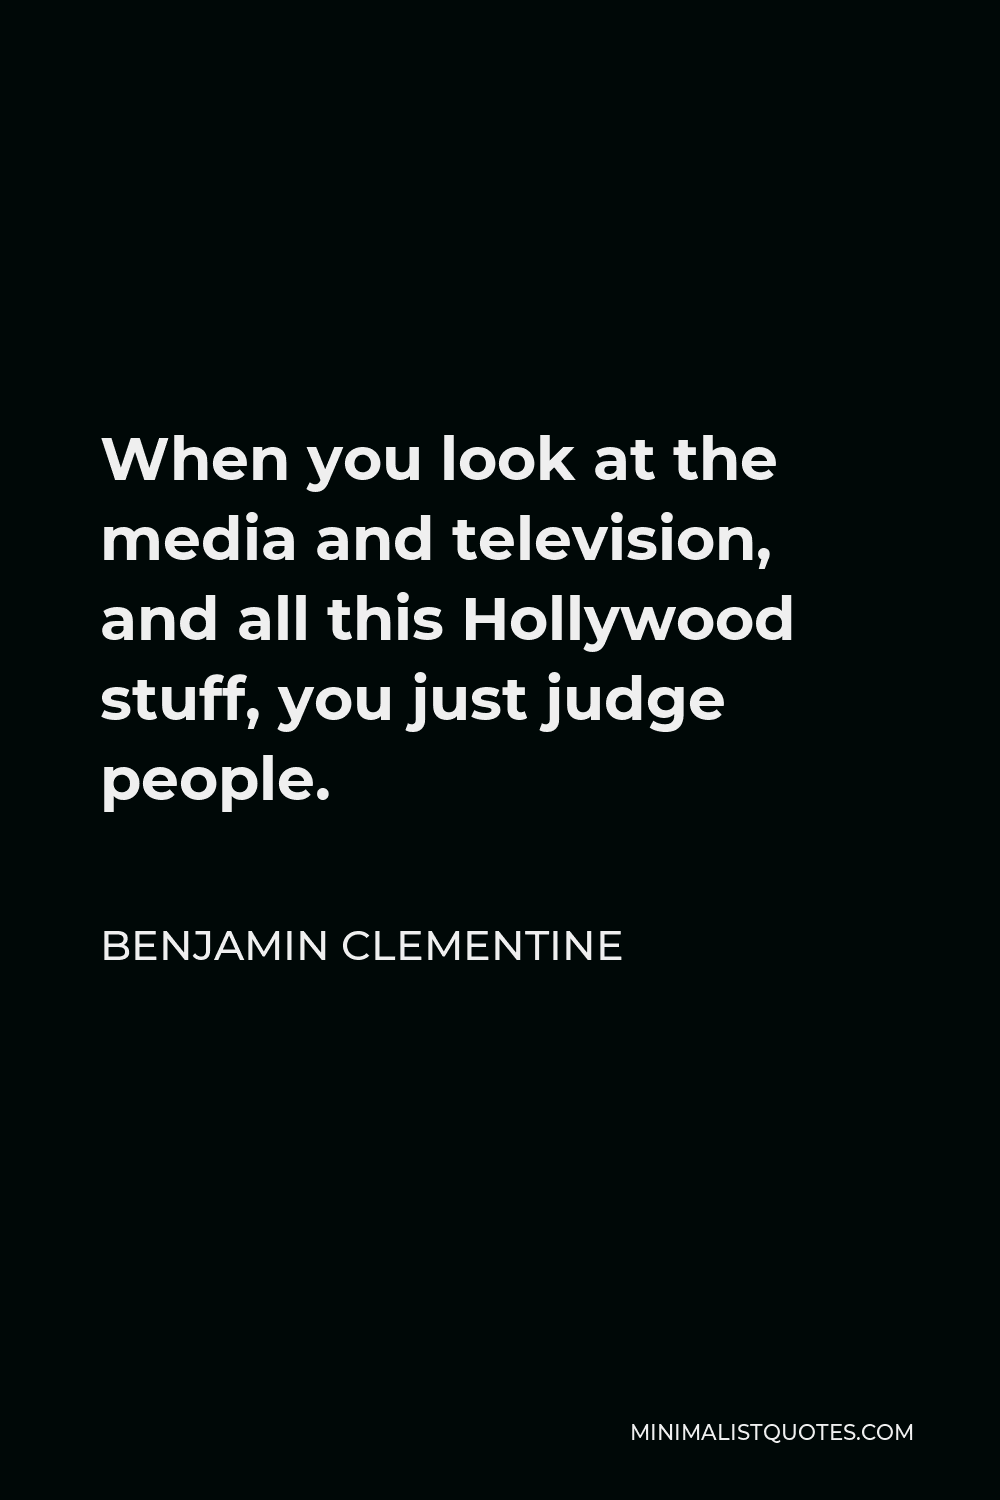 Benjamin Clementine Quote - When you look at the media and television, and all this Hollywood stuff, you just judge people.